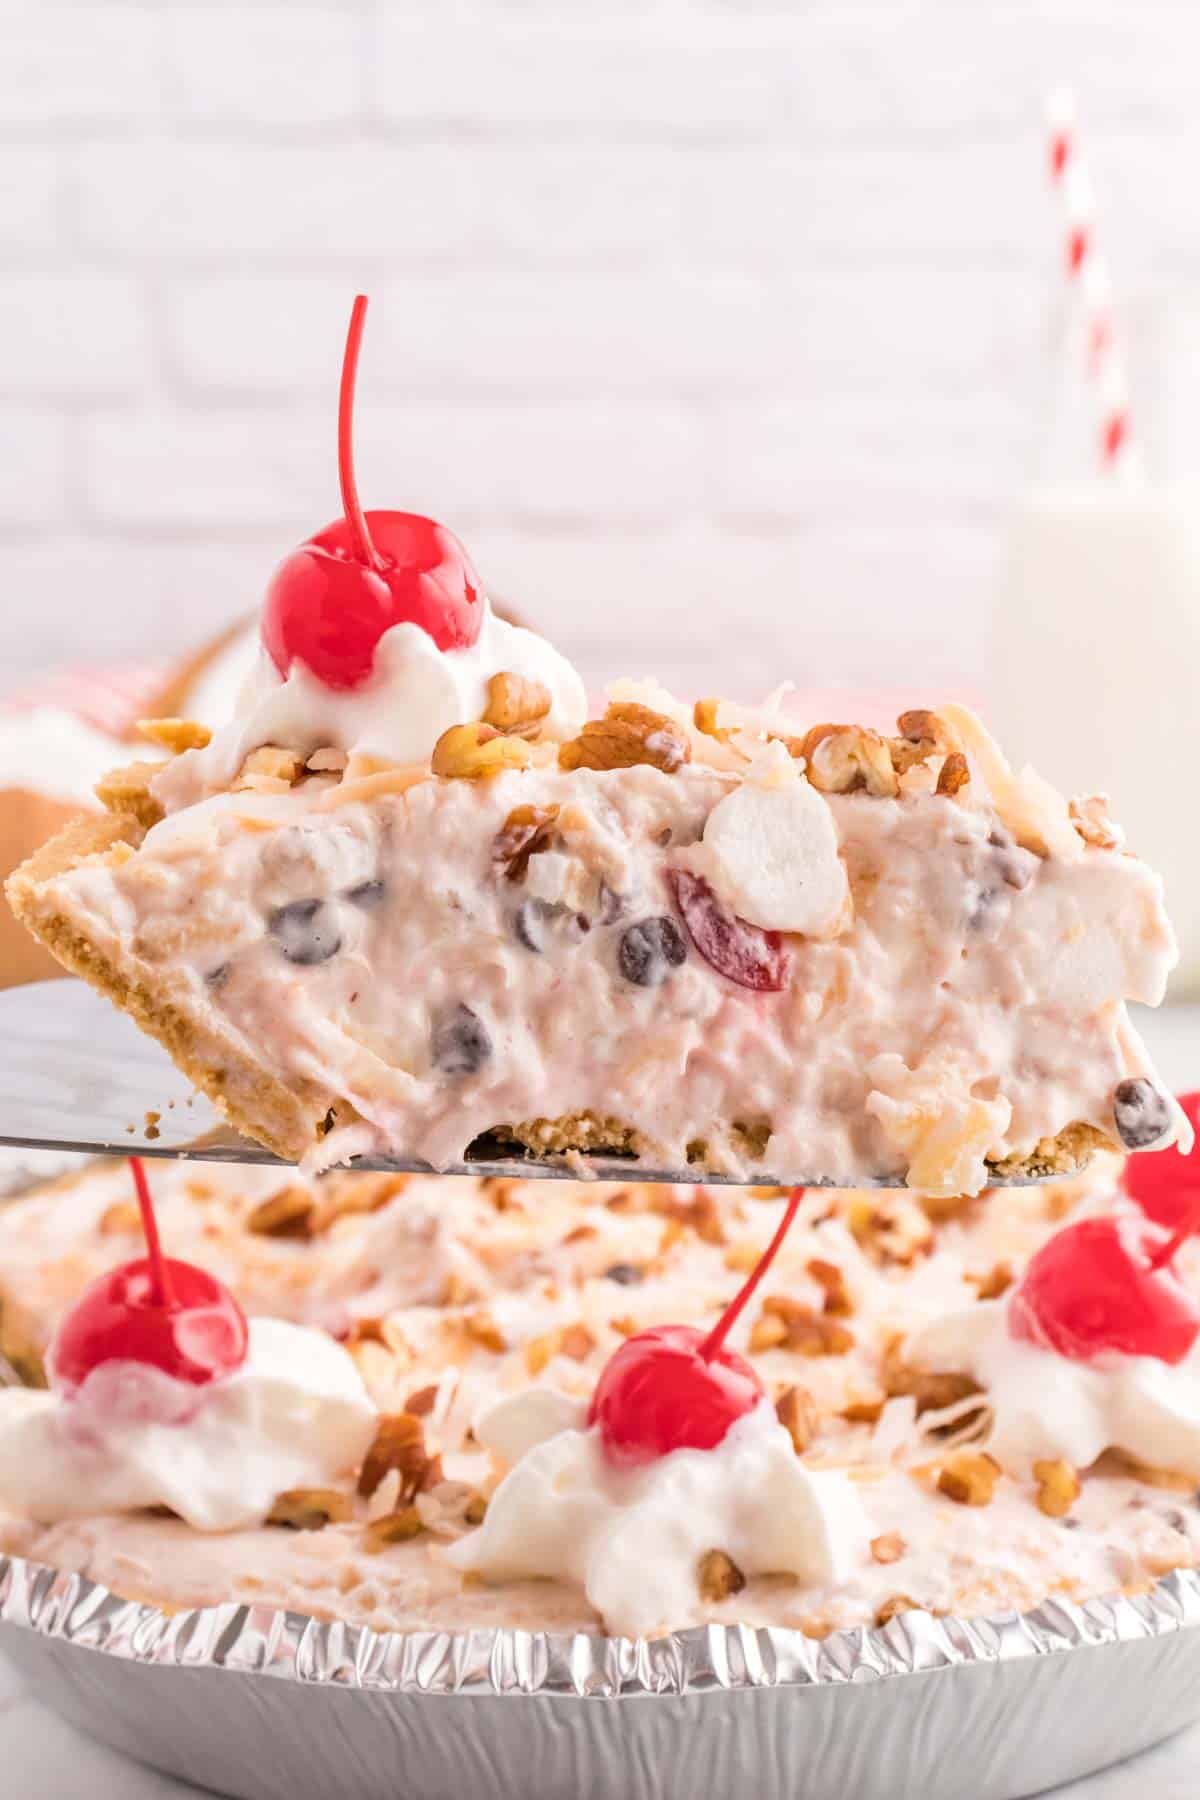 Million Dollar Pie is a creamy no bake pie loaded with crushed pineapple, chopped pecans, toasted coconut, maraschino cherries, mini marshmallows and chocolate chips all in a graham cracker crust.